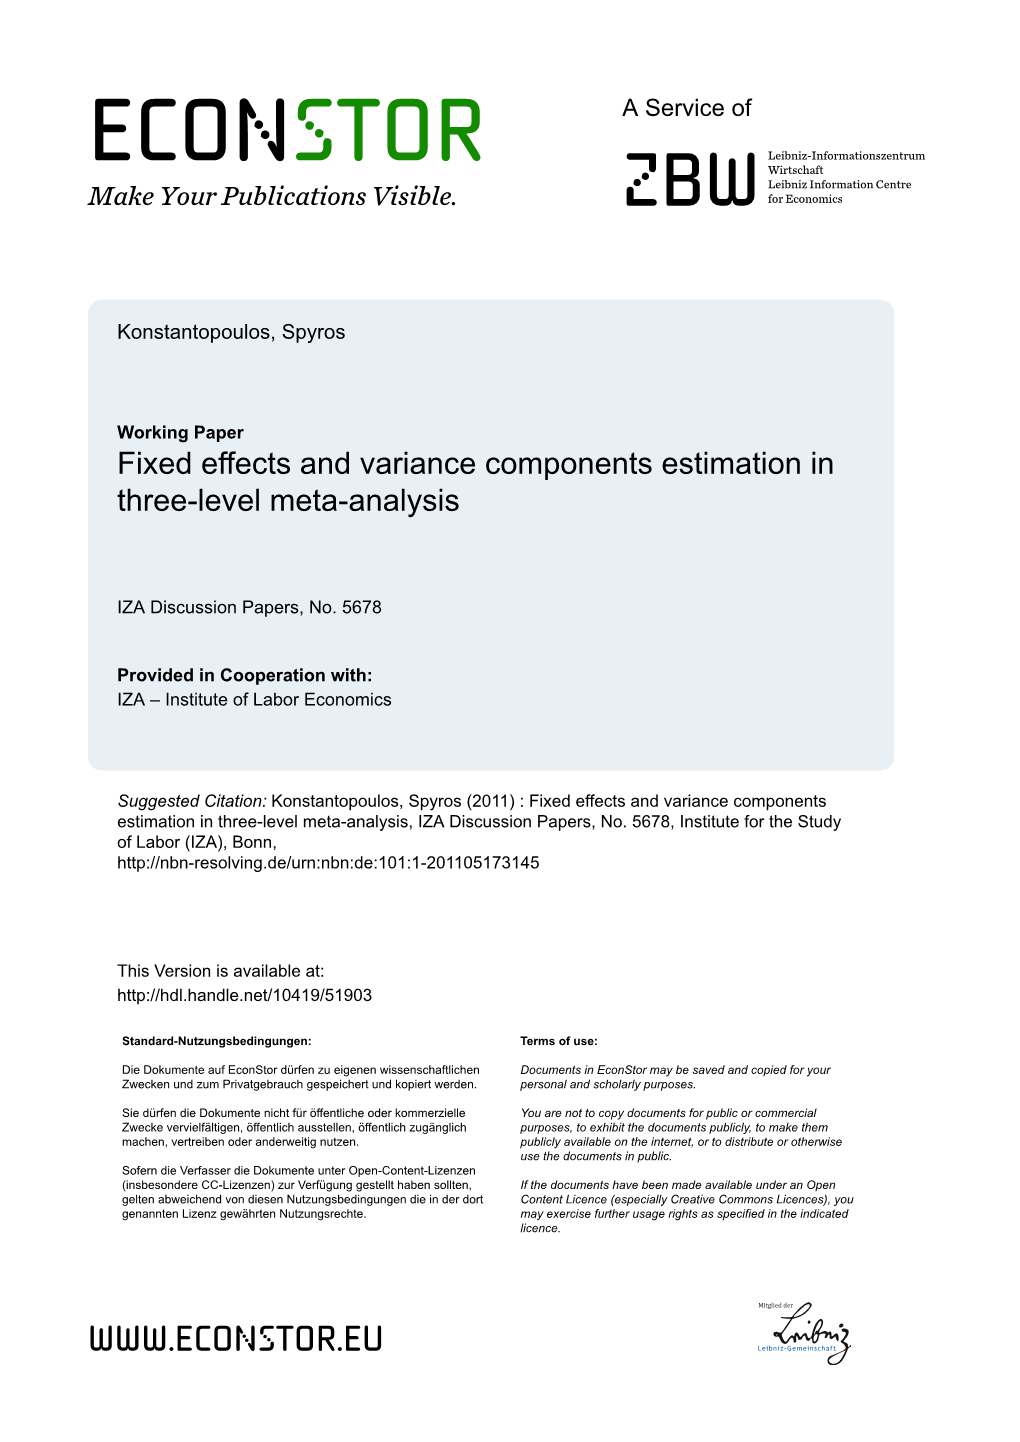 Fixed Effects and Variance Components Estimation in Three-Level Meta-Analysis